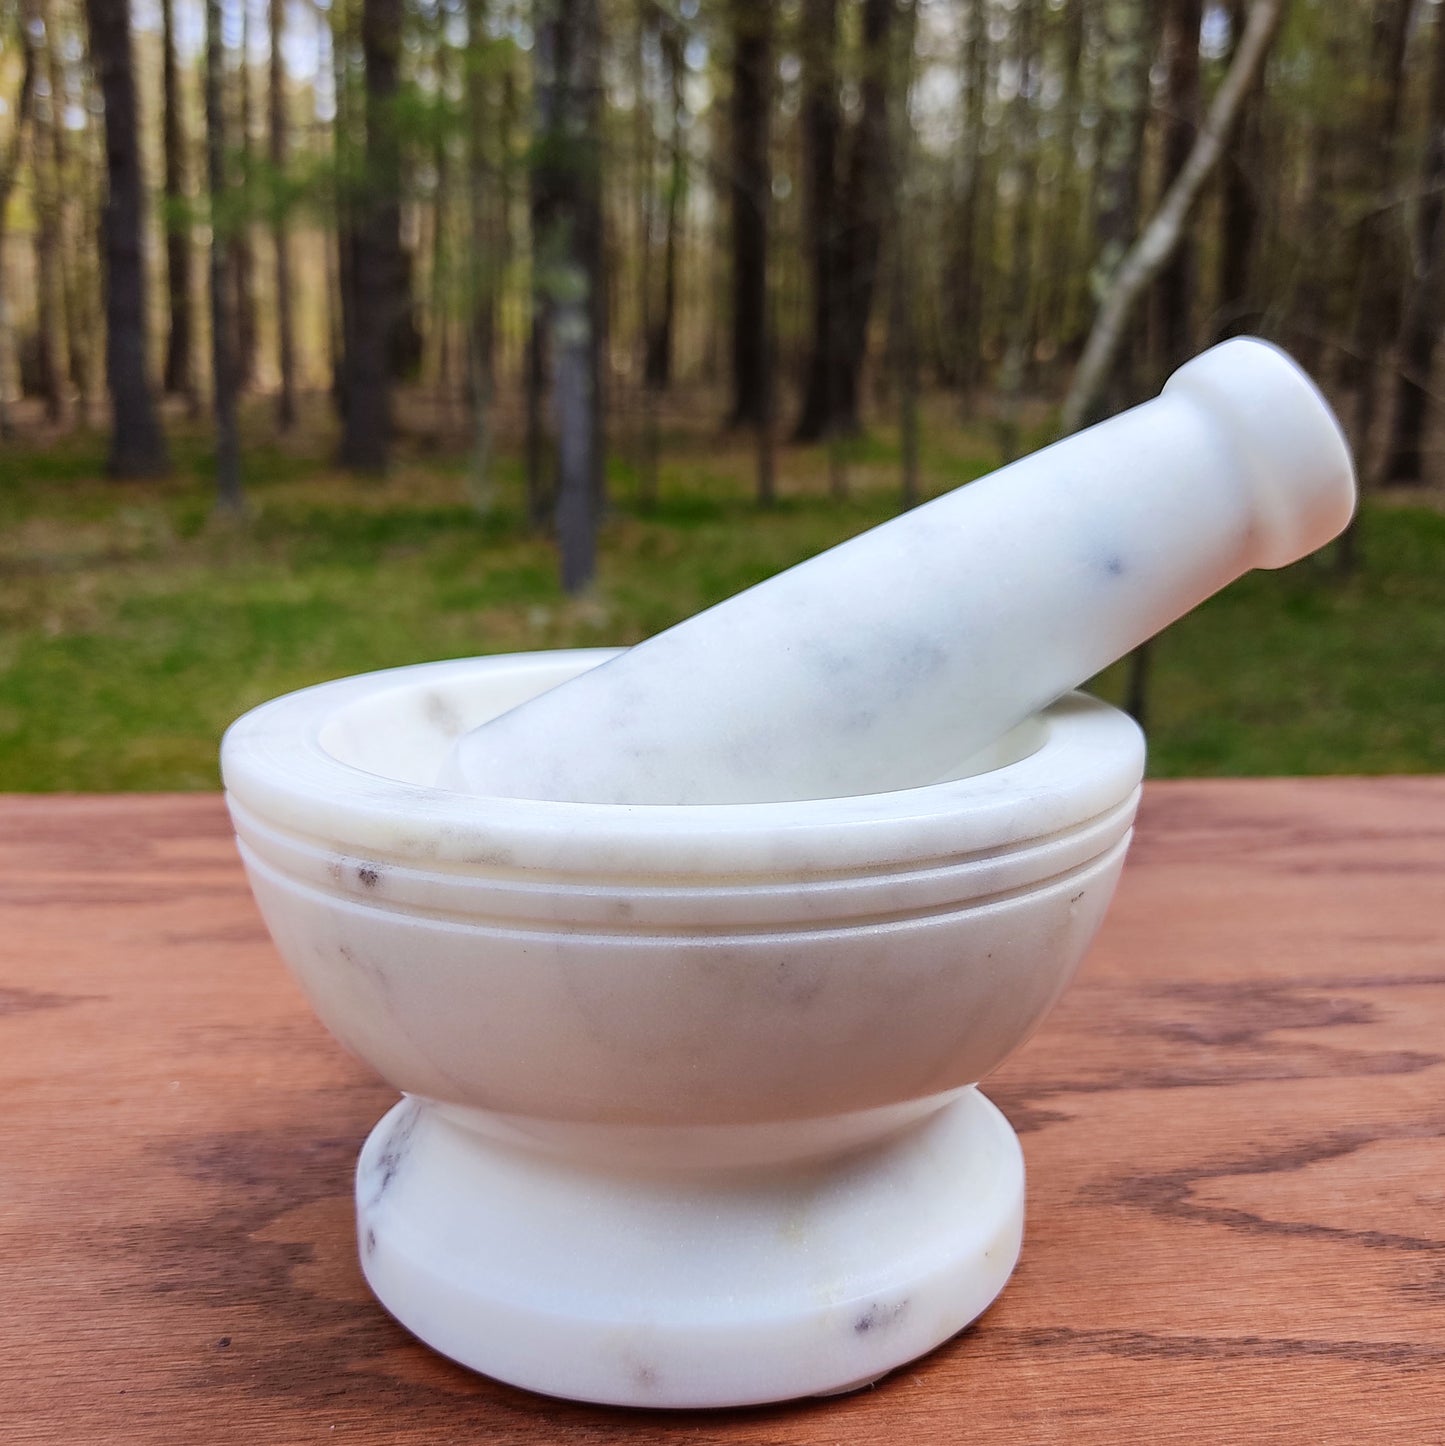 White Marble Mortar and Pestle Handmade and Beautiful - 5" Wide